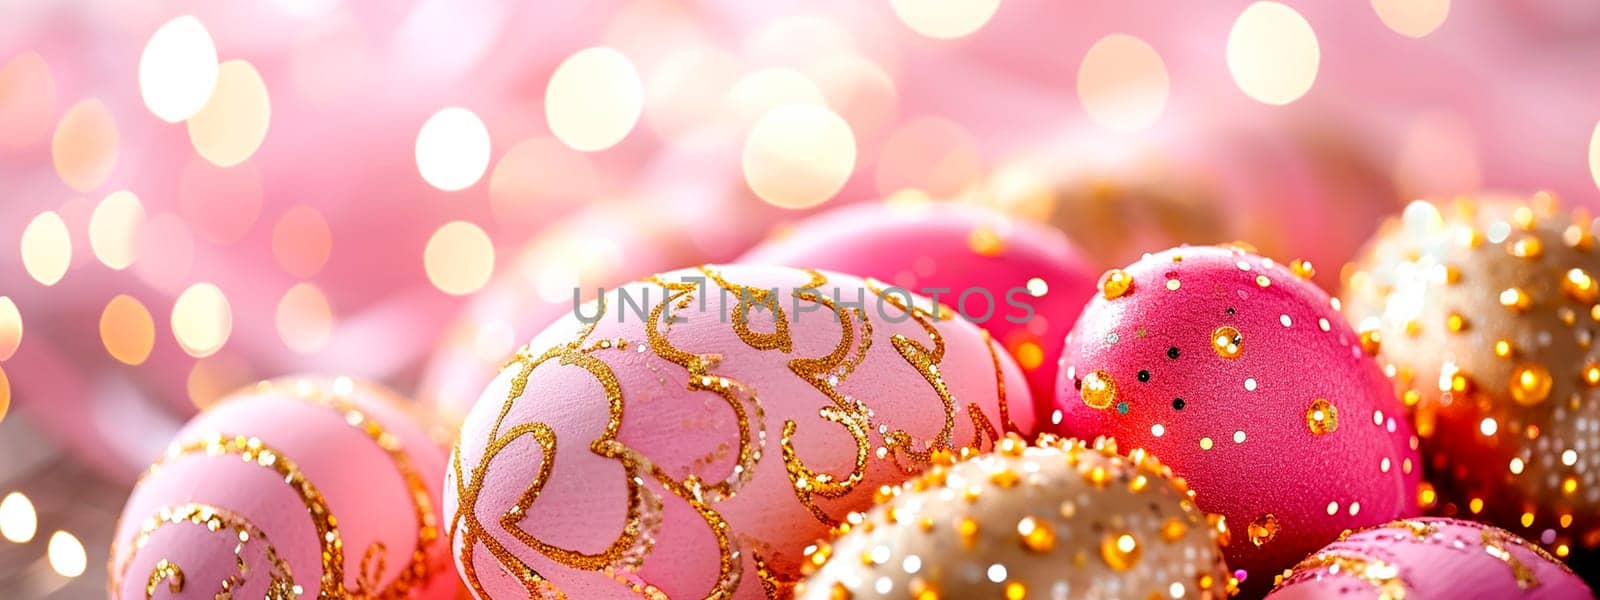 Golden eggs on a shiny Easter background. Selective focus. by yanadjana